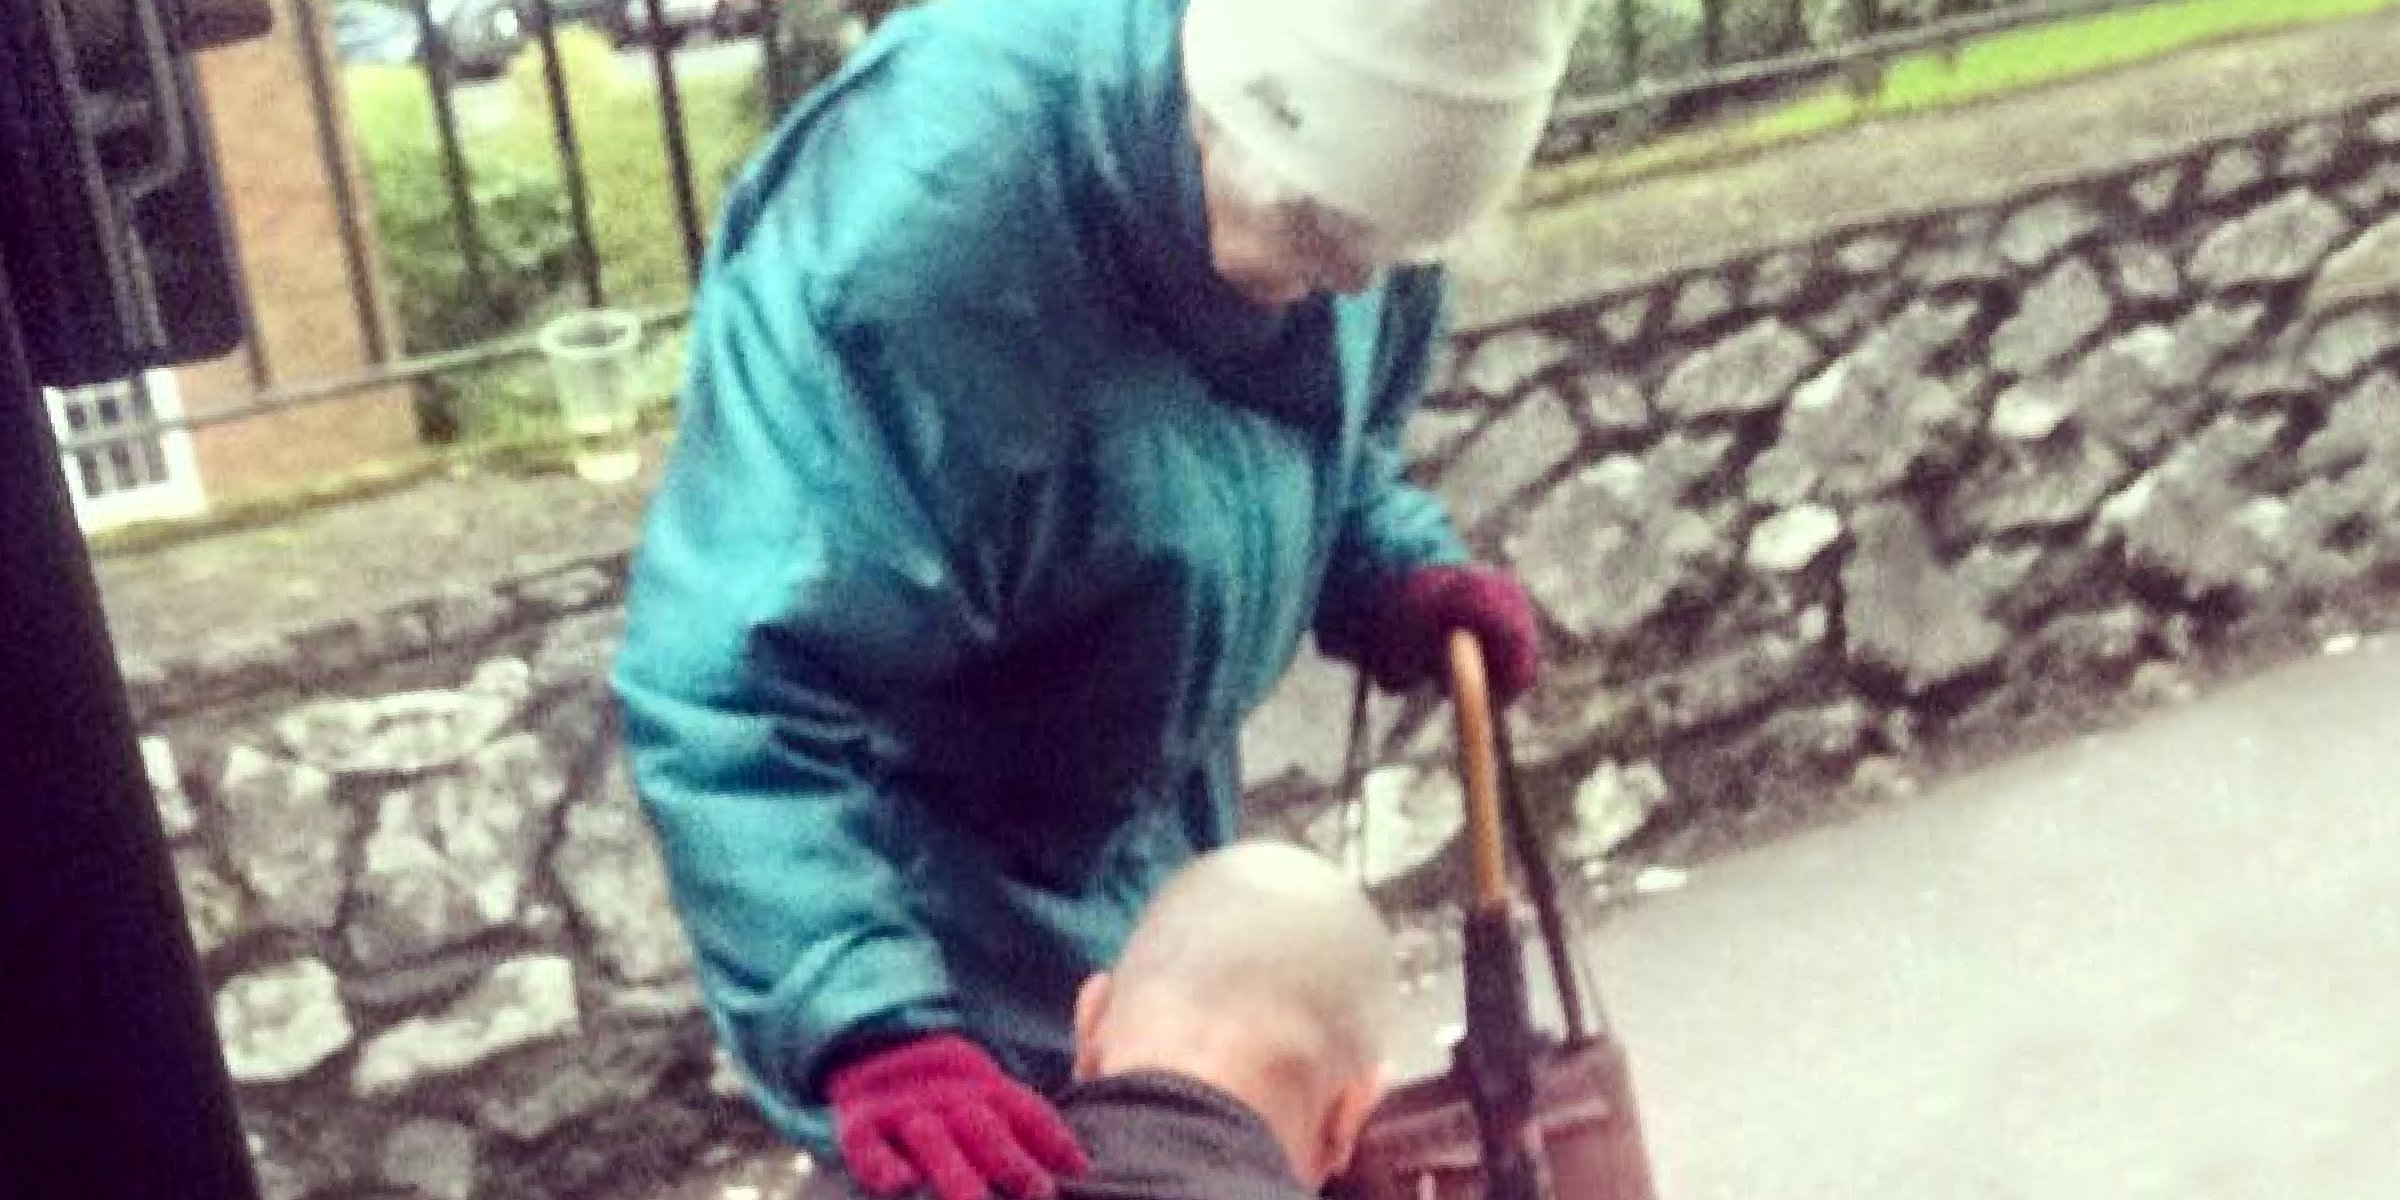 Bus driver ties the shoelaces for an elderly lady | Source: Facebook.com/claralouiseobrien